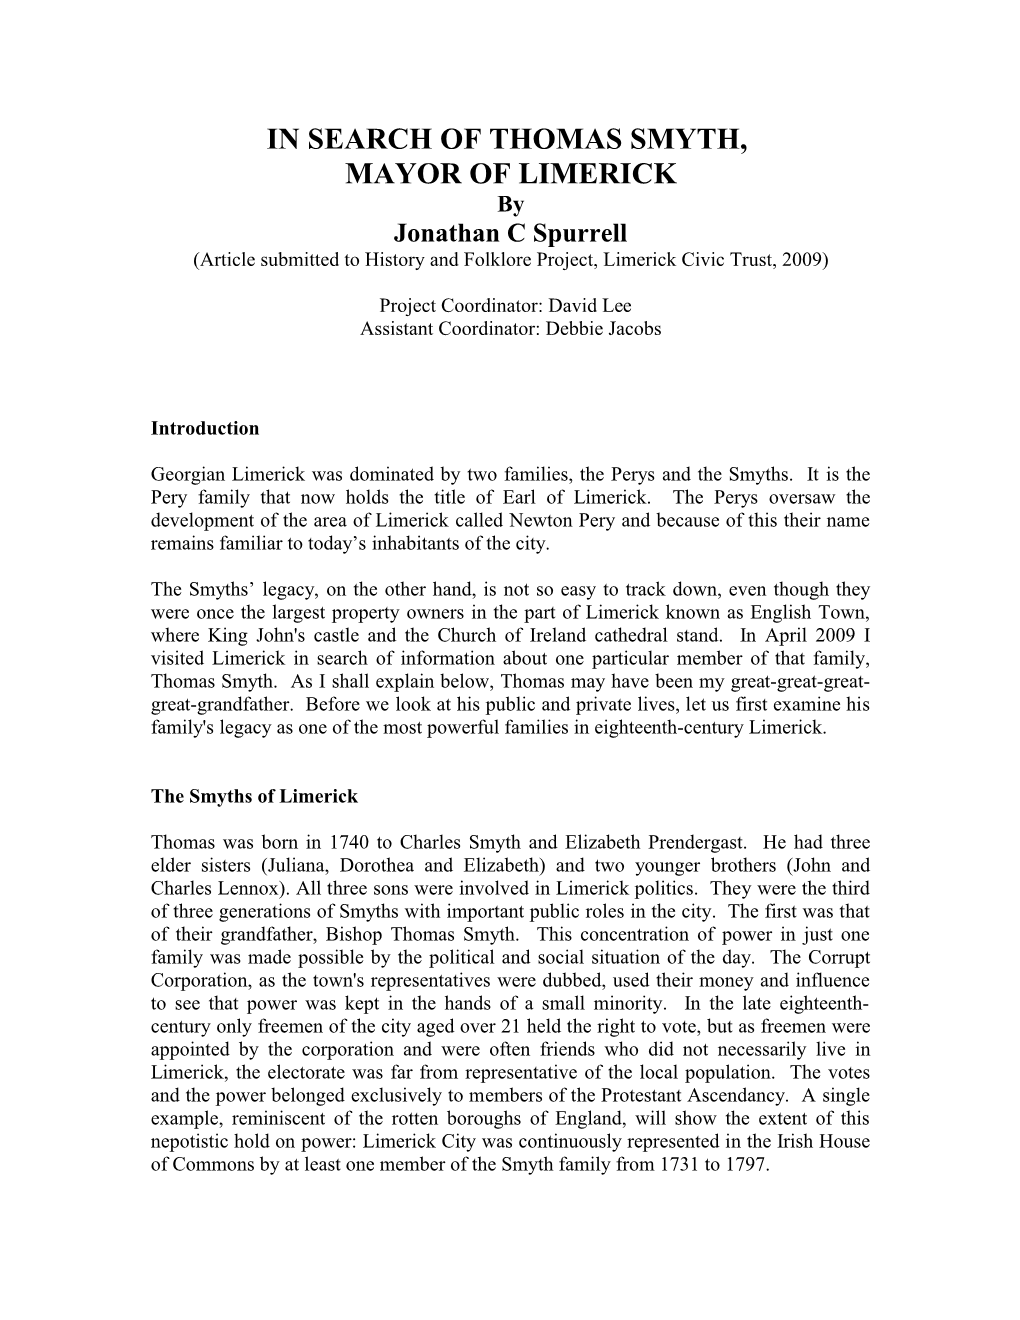 'In Search of Thomas Smyth, Mayor of Limerick' by Jonathan C Spurrell